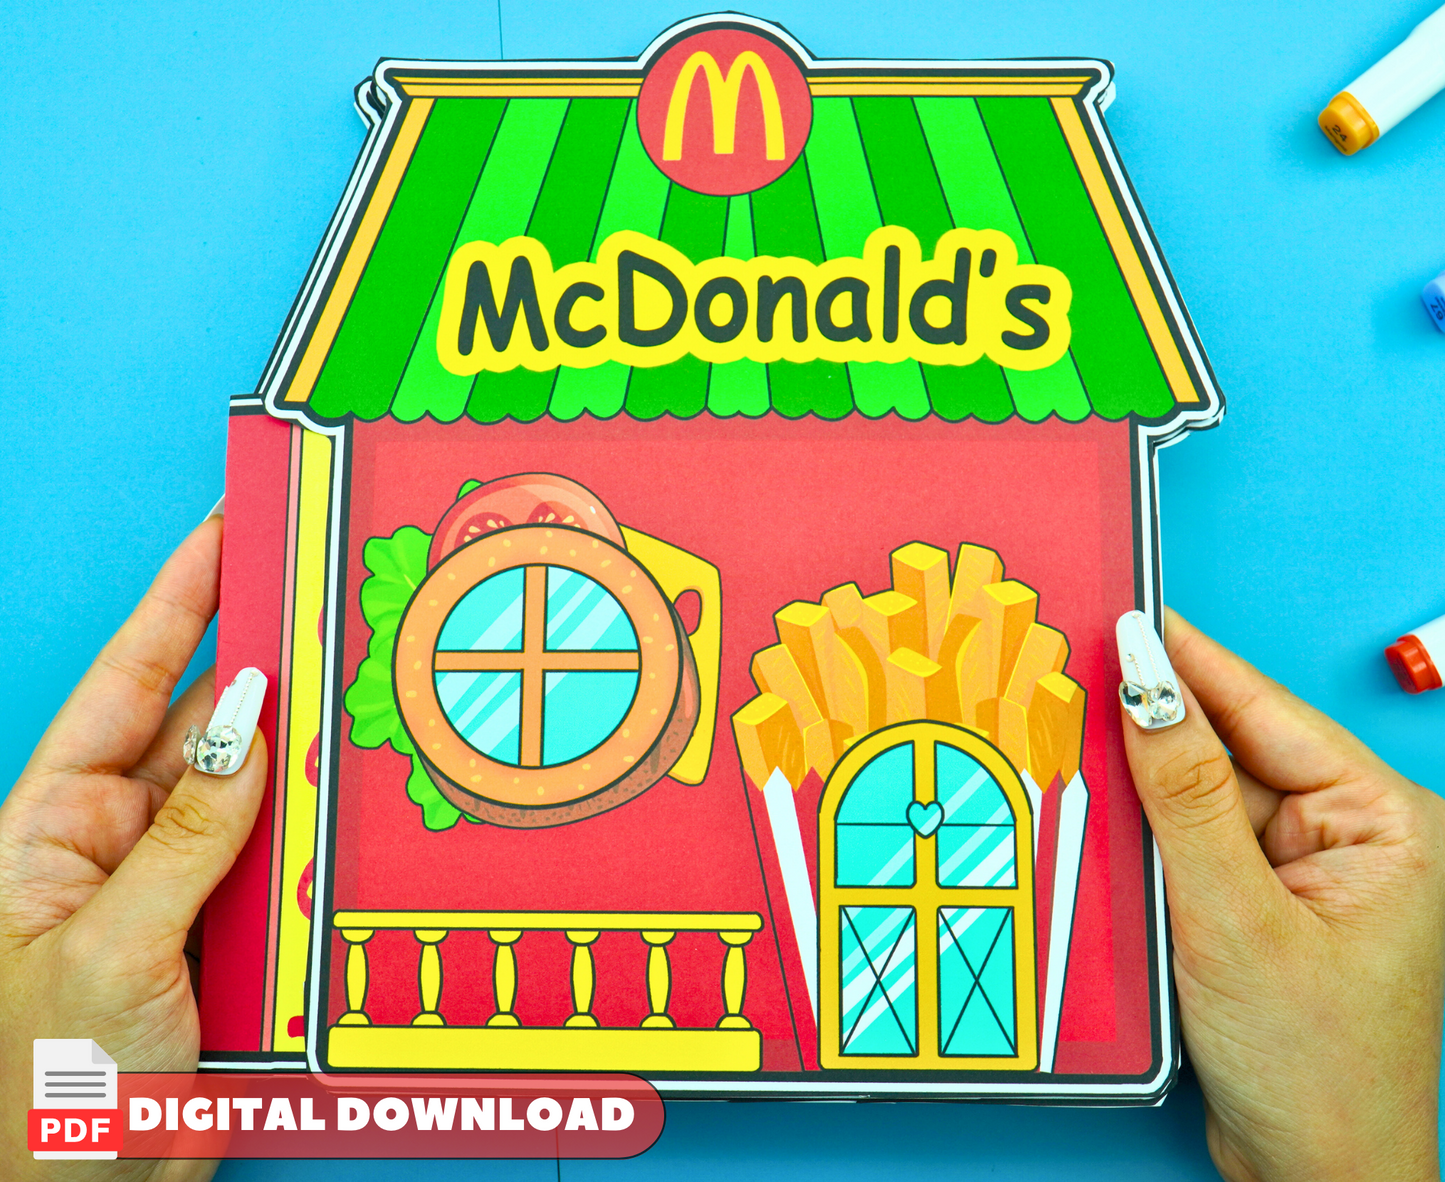 USA, Free Shipping Paper Play Book For Babies and Toddler, Paper Mc Donald's Store Paper Camping Busy Book, Christmas Gifts for kids